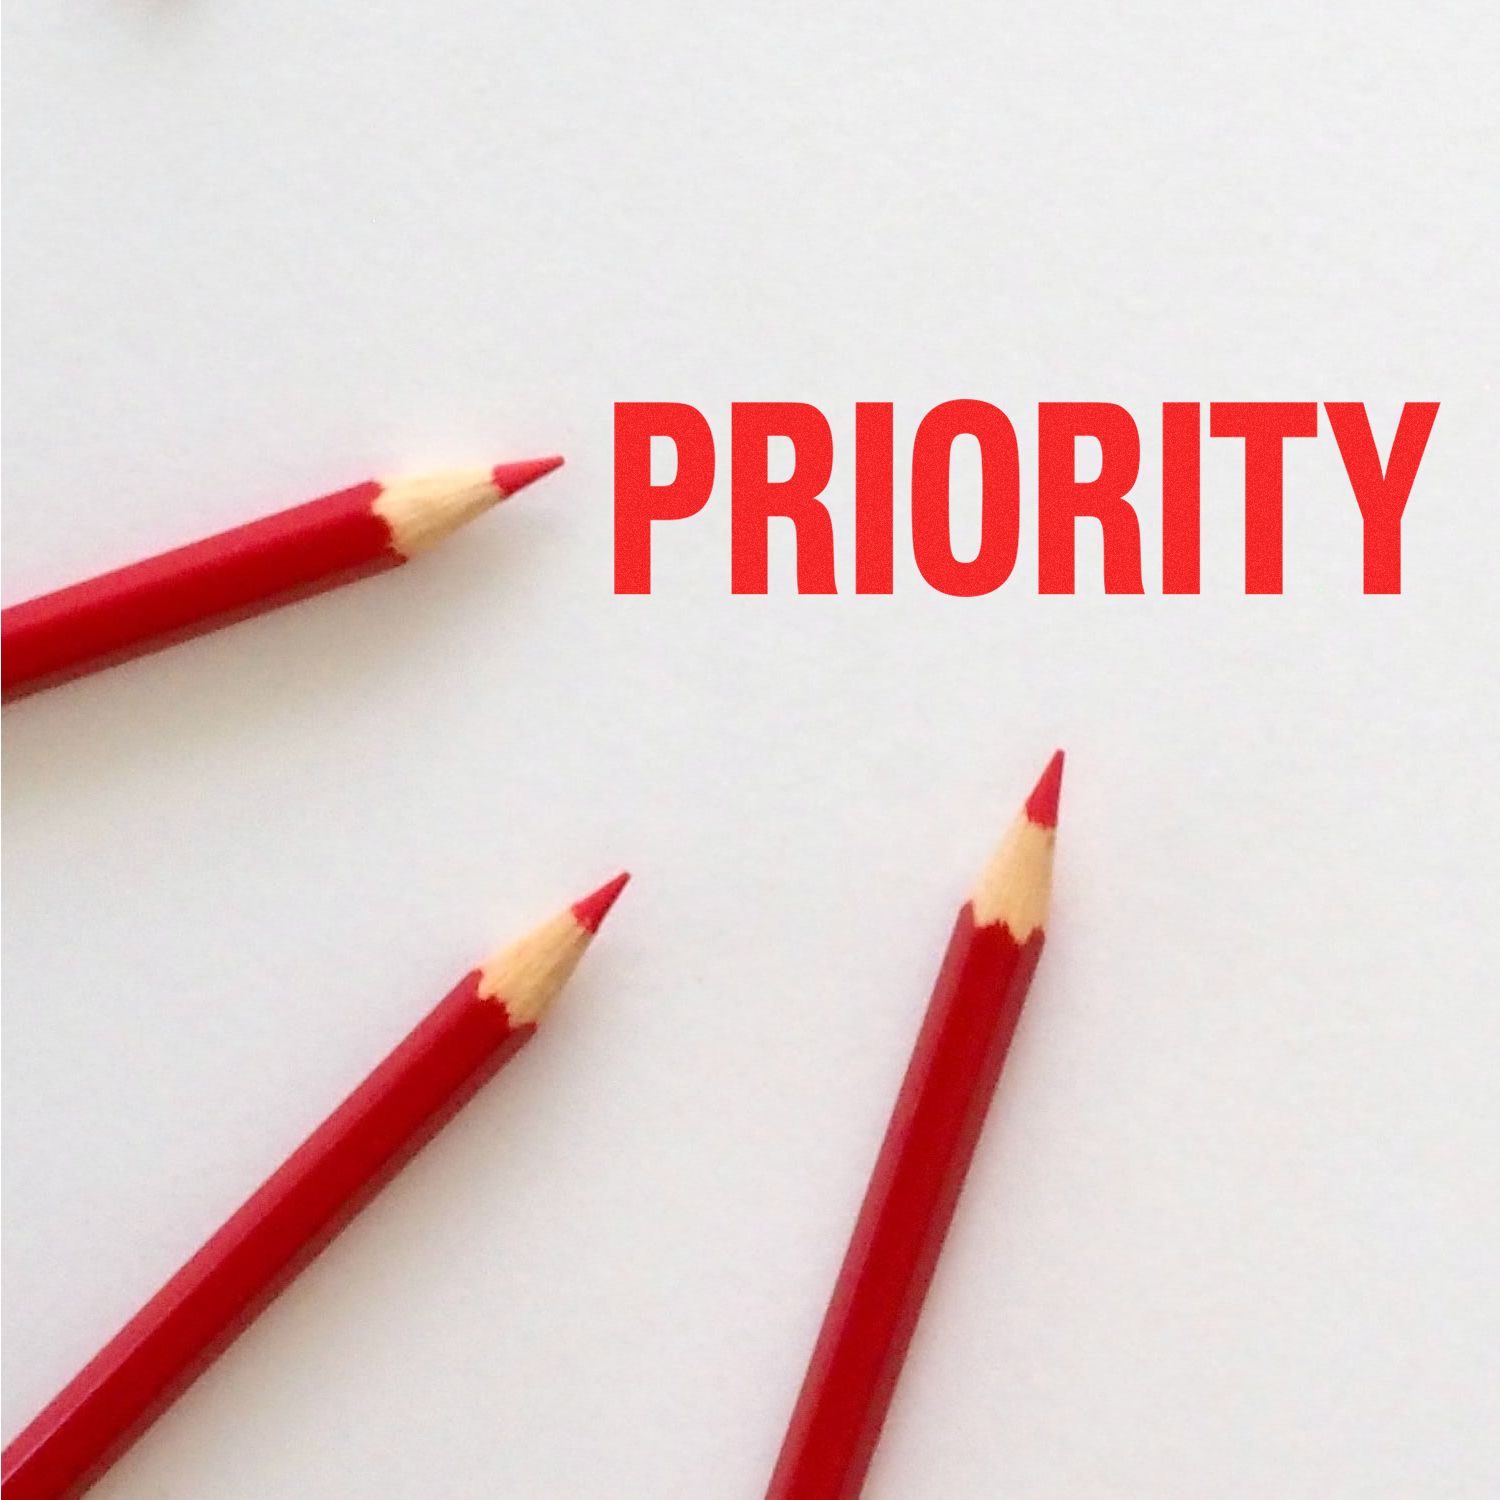 Bold Priority Rubber Stamp In Use Photo